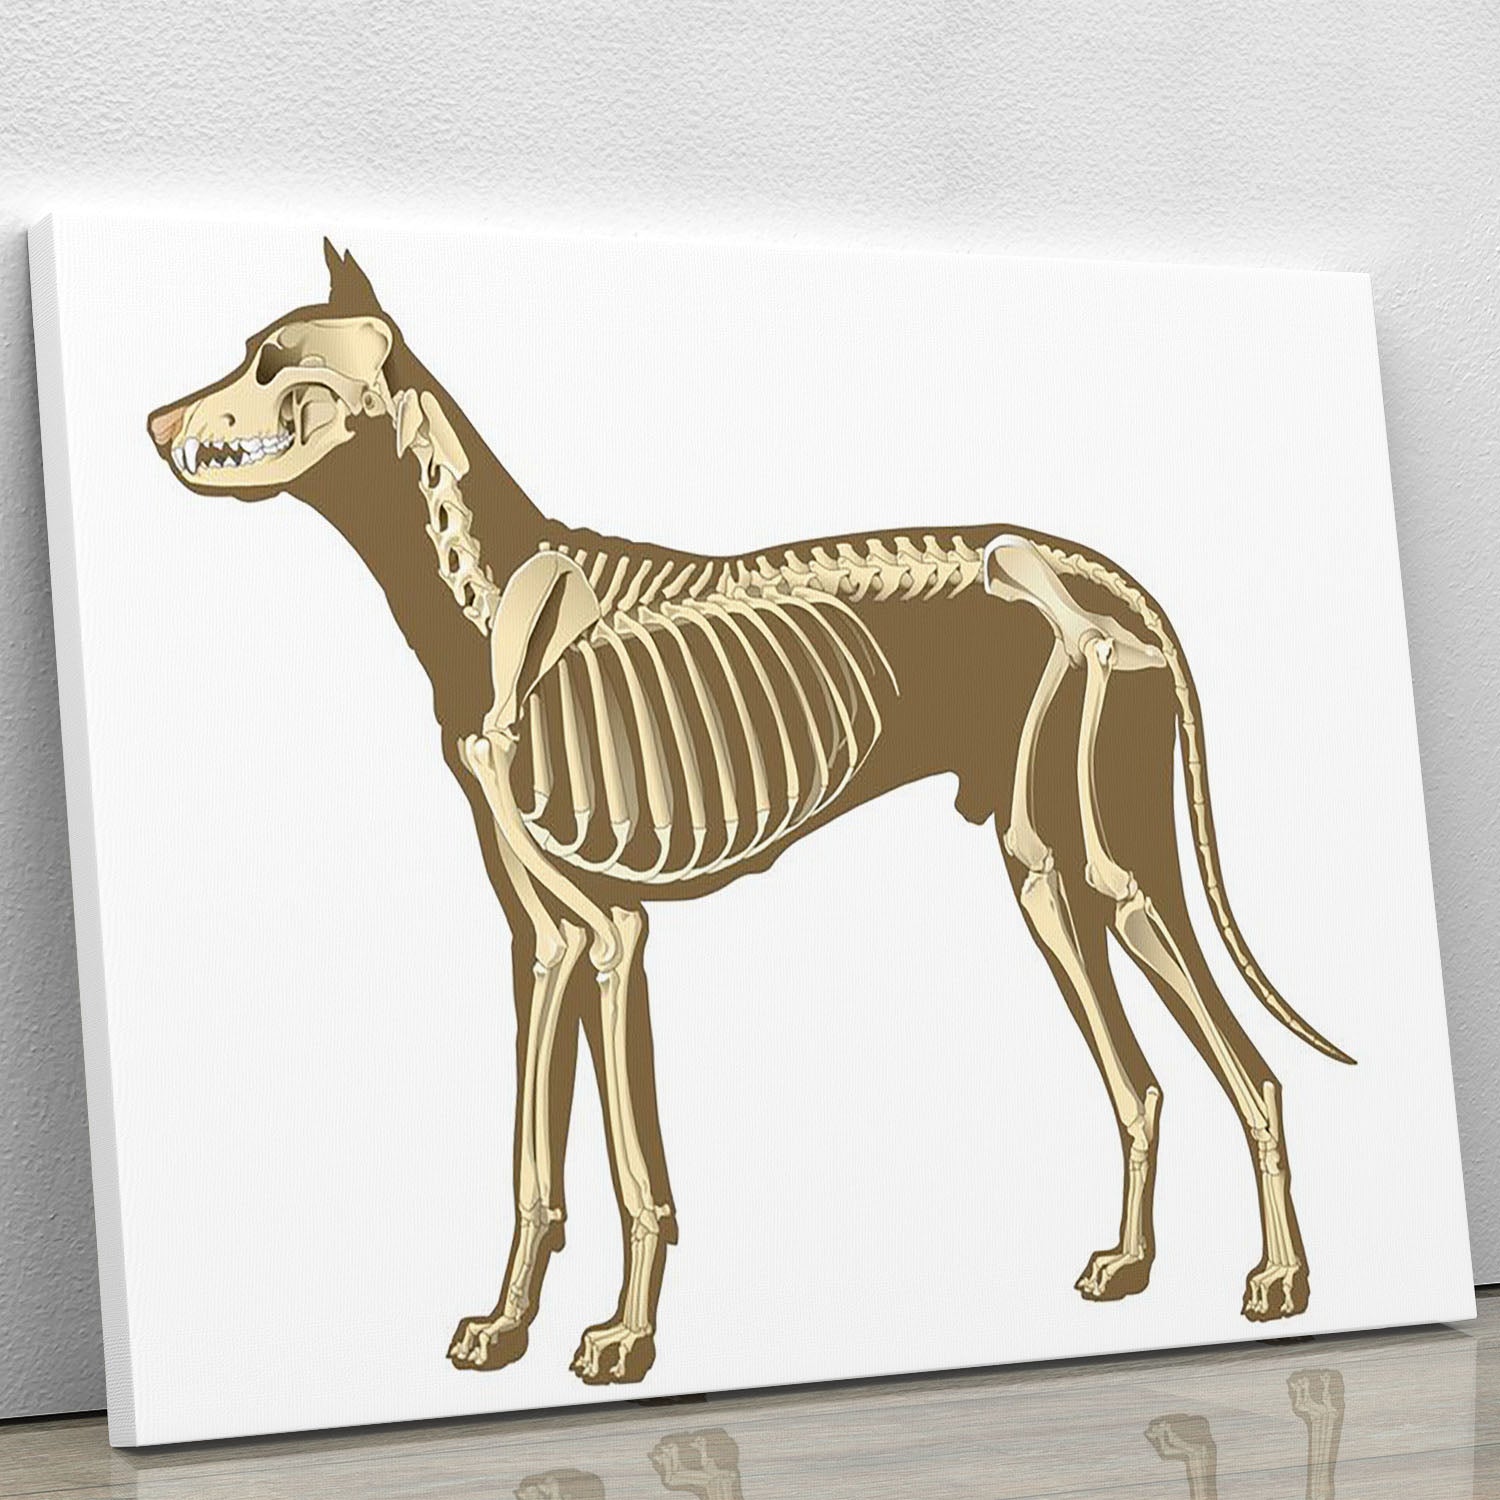 Skeleton of dog section with bones x ray Canvas Print or Poster - Canvas Art Rocks - 1